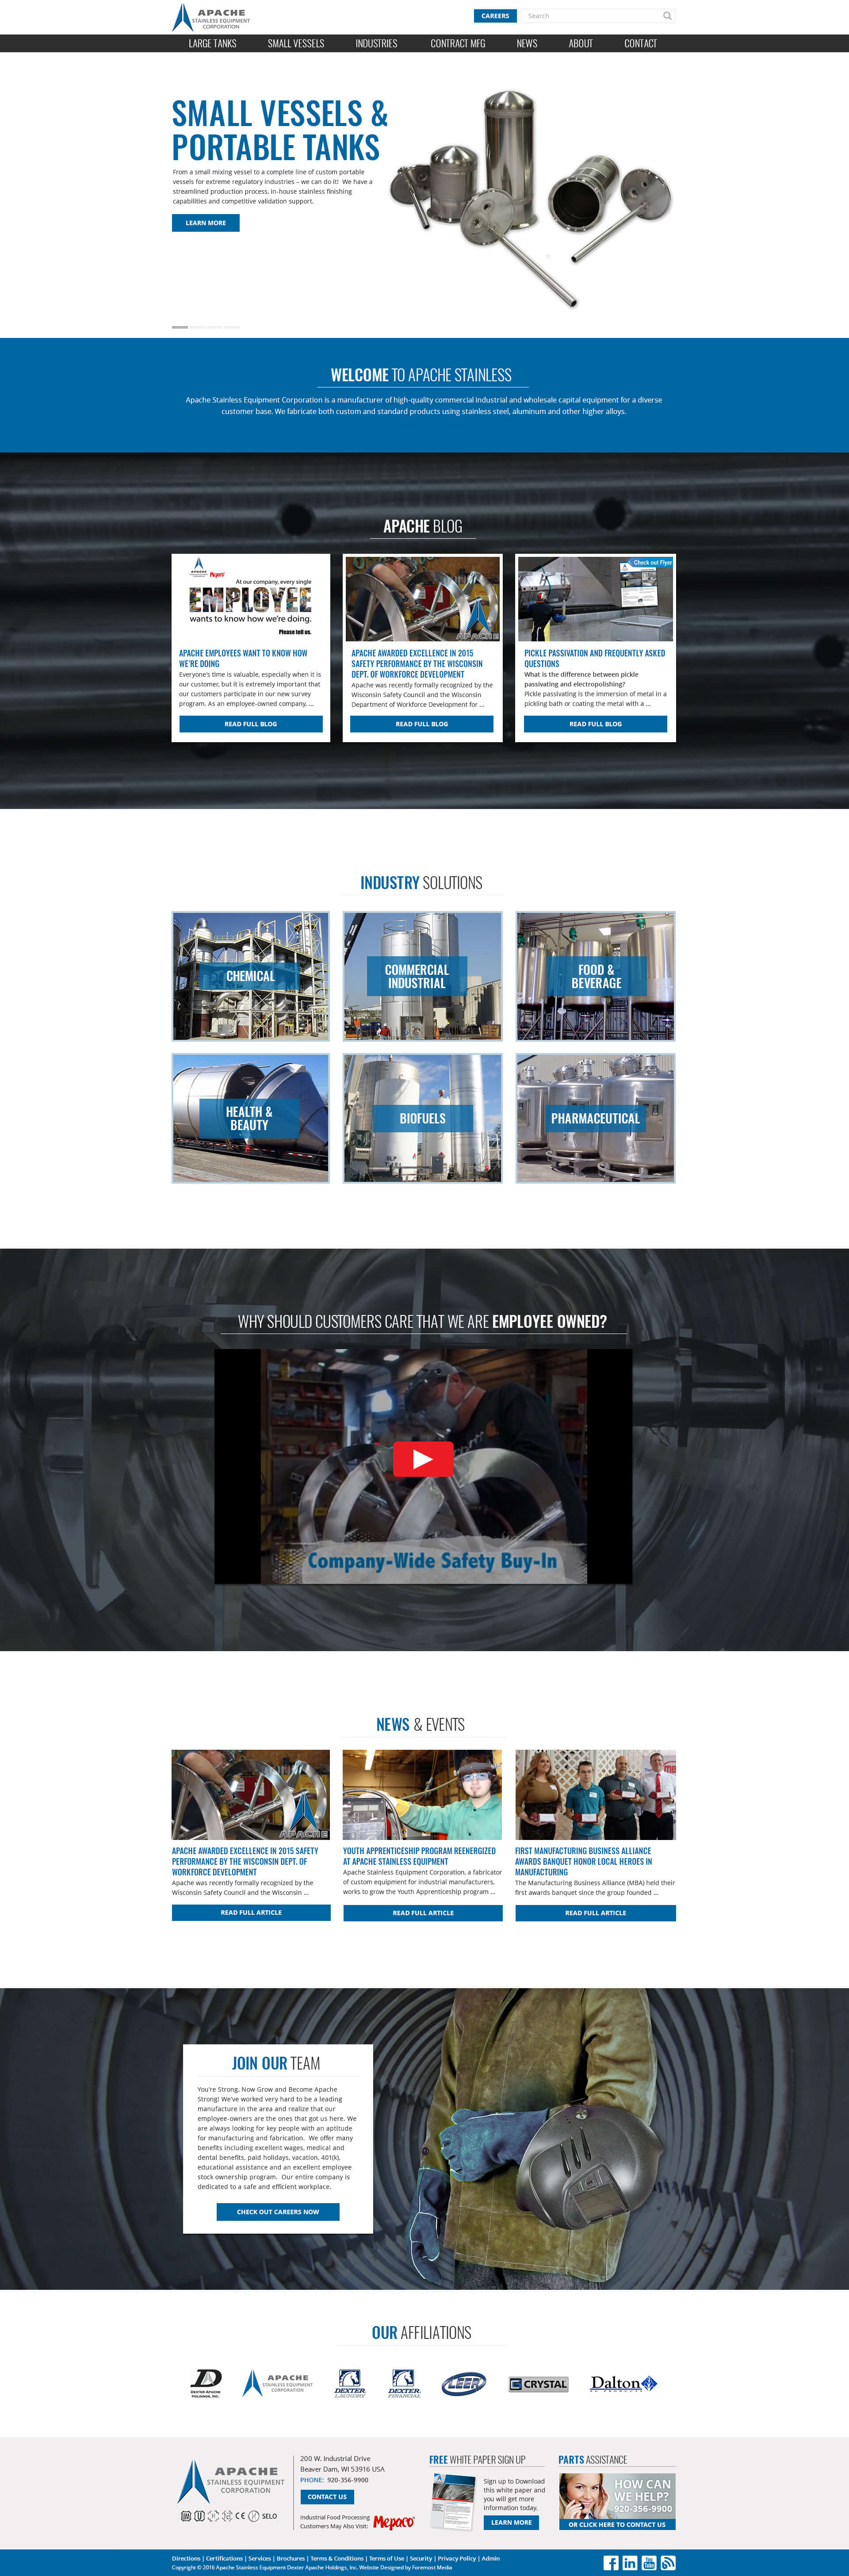 Example of the new and improved DNN website designed by Foremost Media for Apache Stainless Equipment Corporation